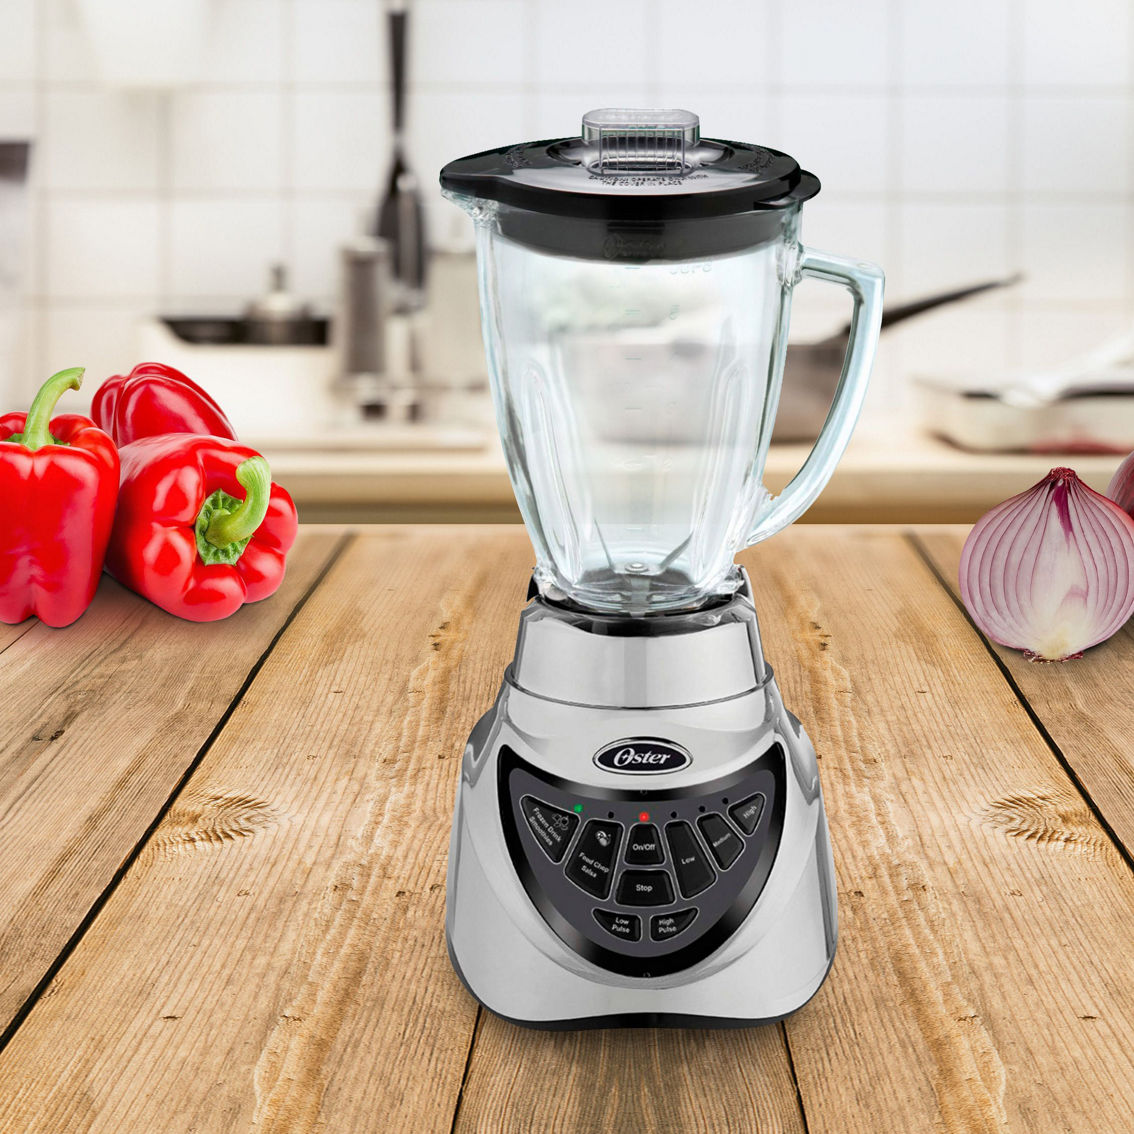 Oster Pro 500 900 Watt 7 Speed Blender in Chrome with 6 Cup Glass Jar - Image 3 of 4